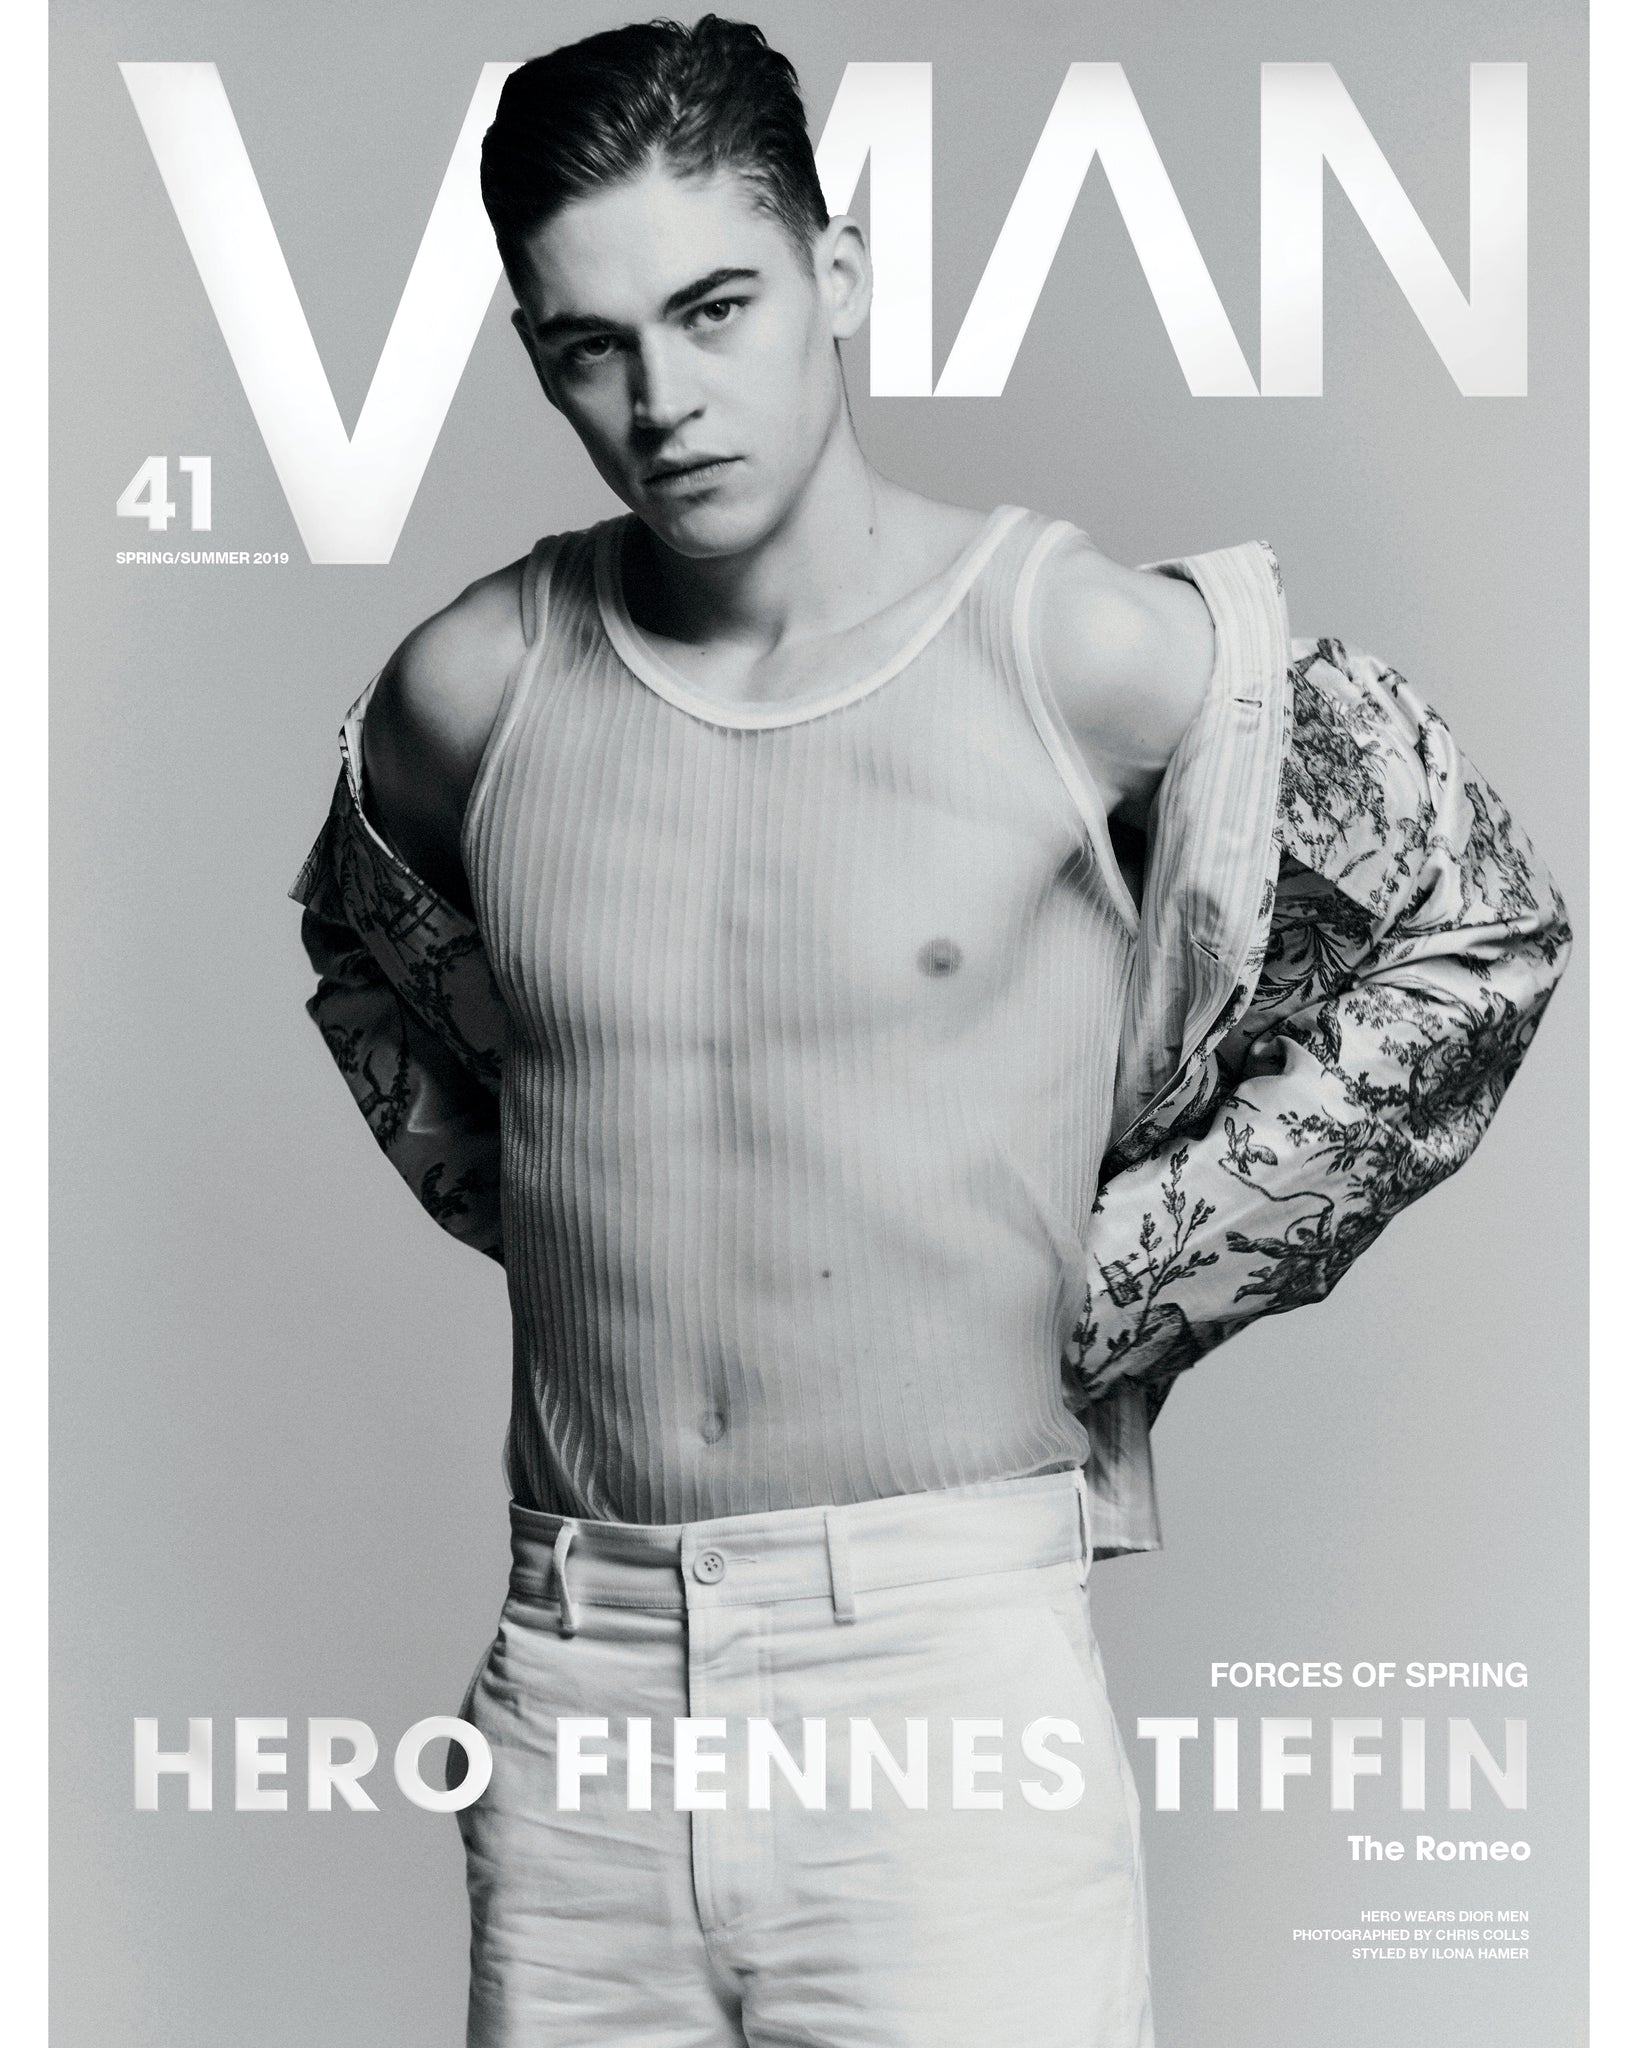 VMAN 41: FORCES OF SPRING